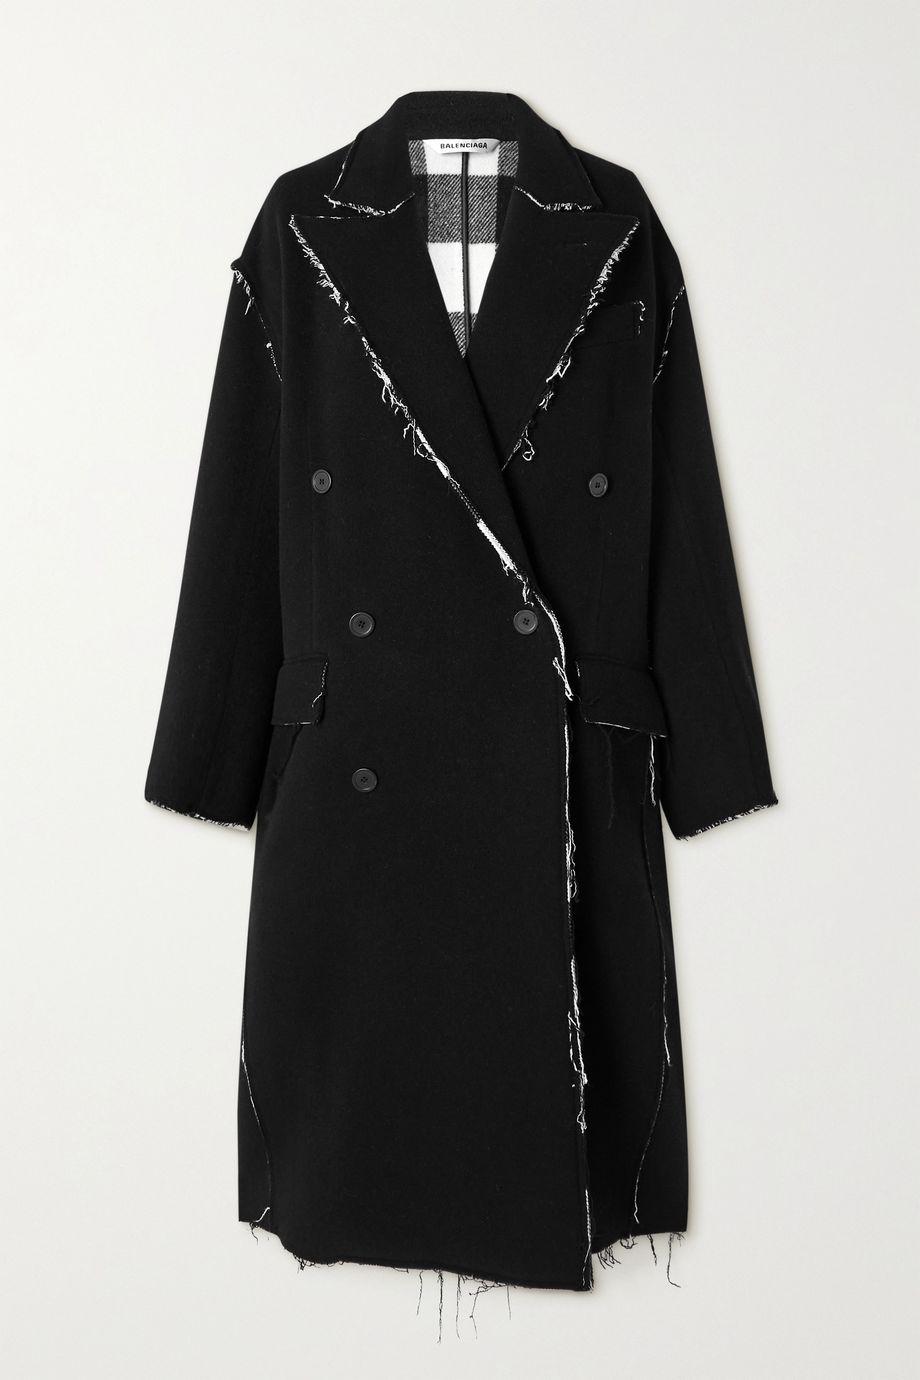 Oversized double-breasted frayed wool-blend coat by BALENCIAGA